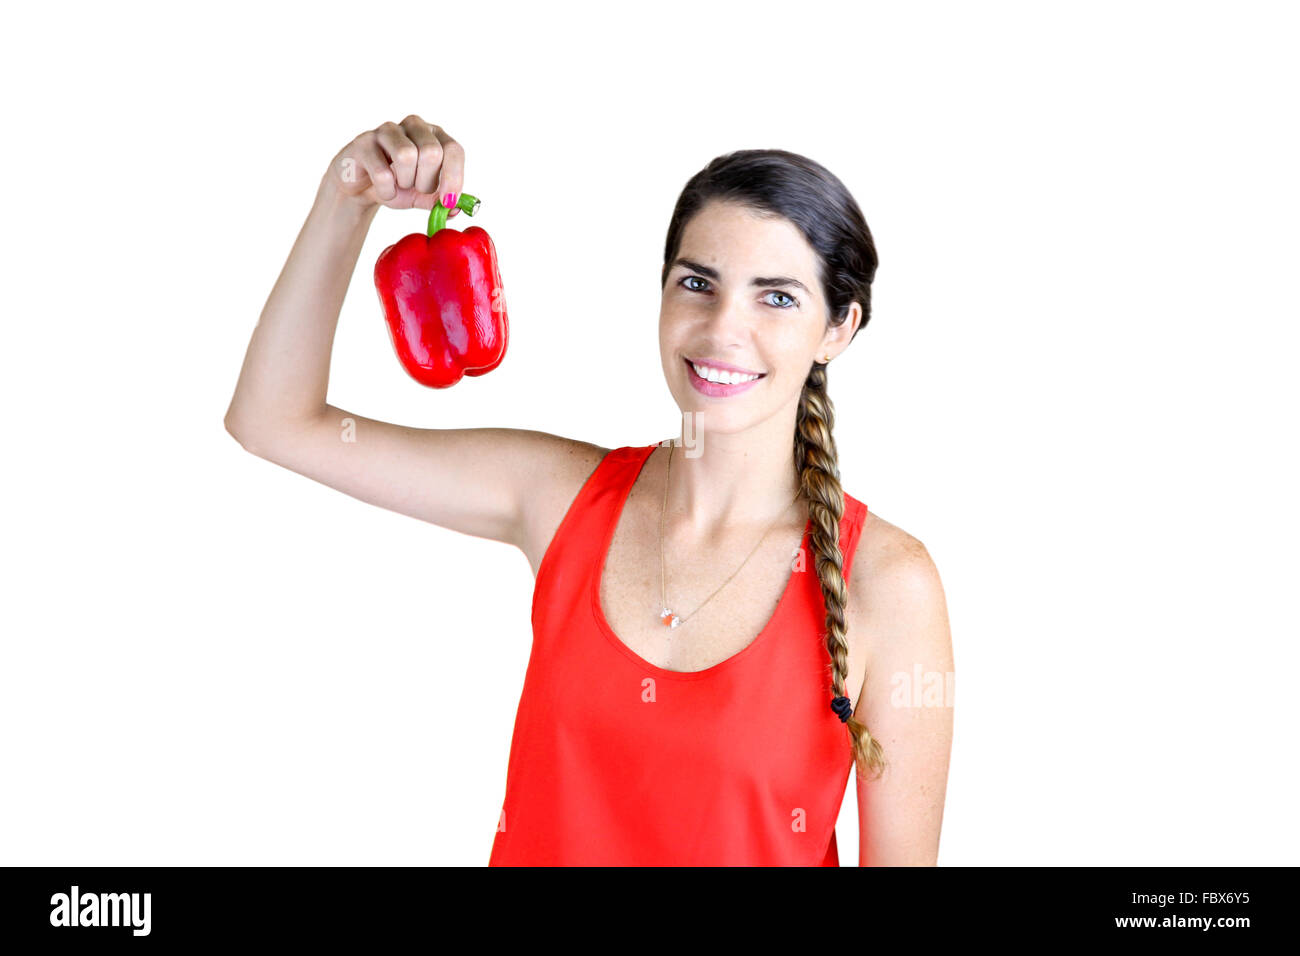 This is a big Pepper Stock Photo